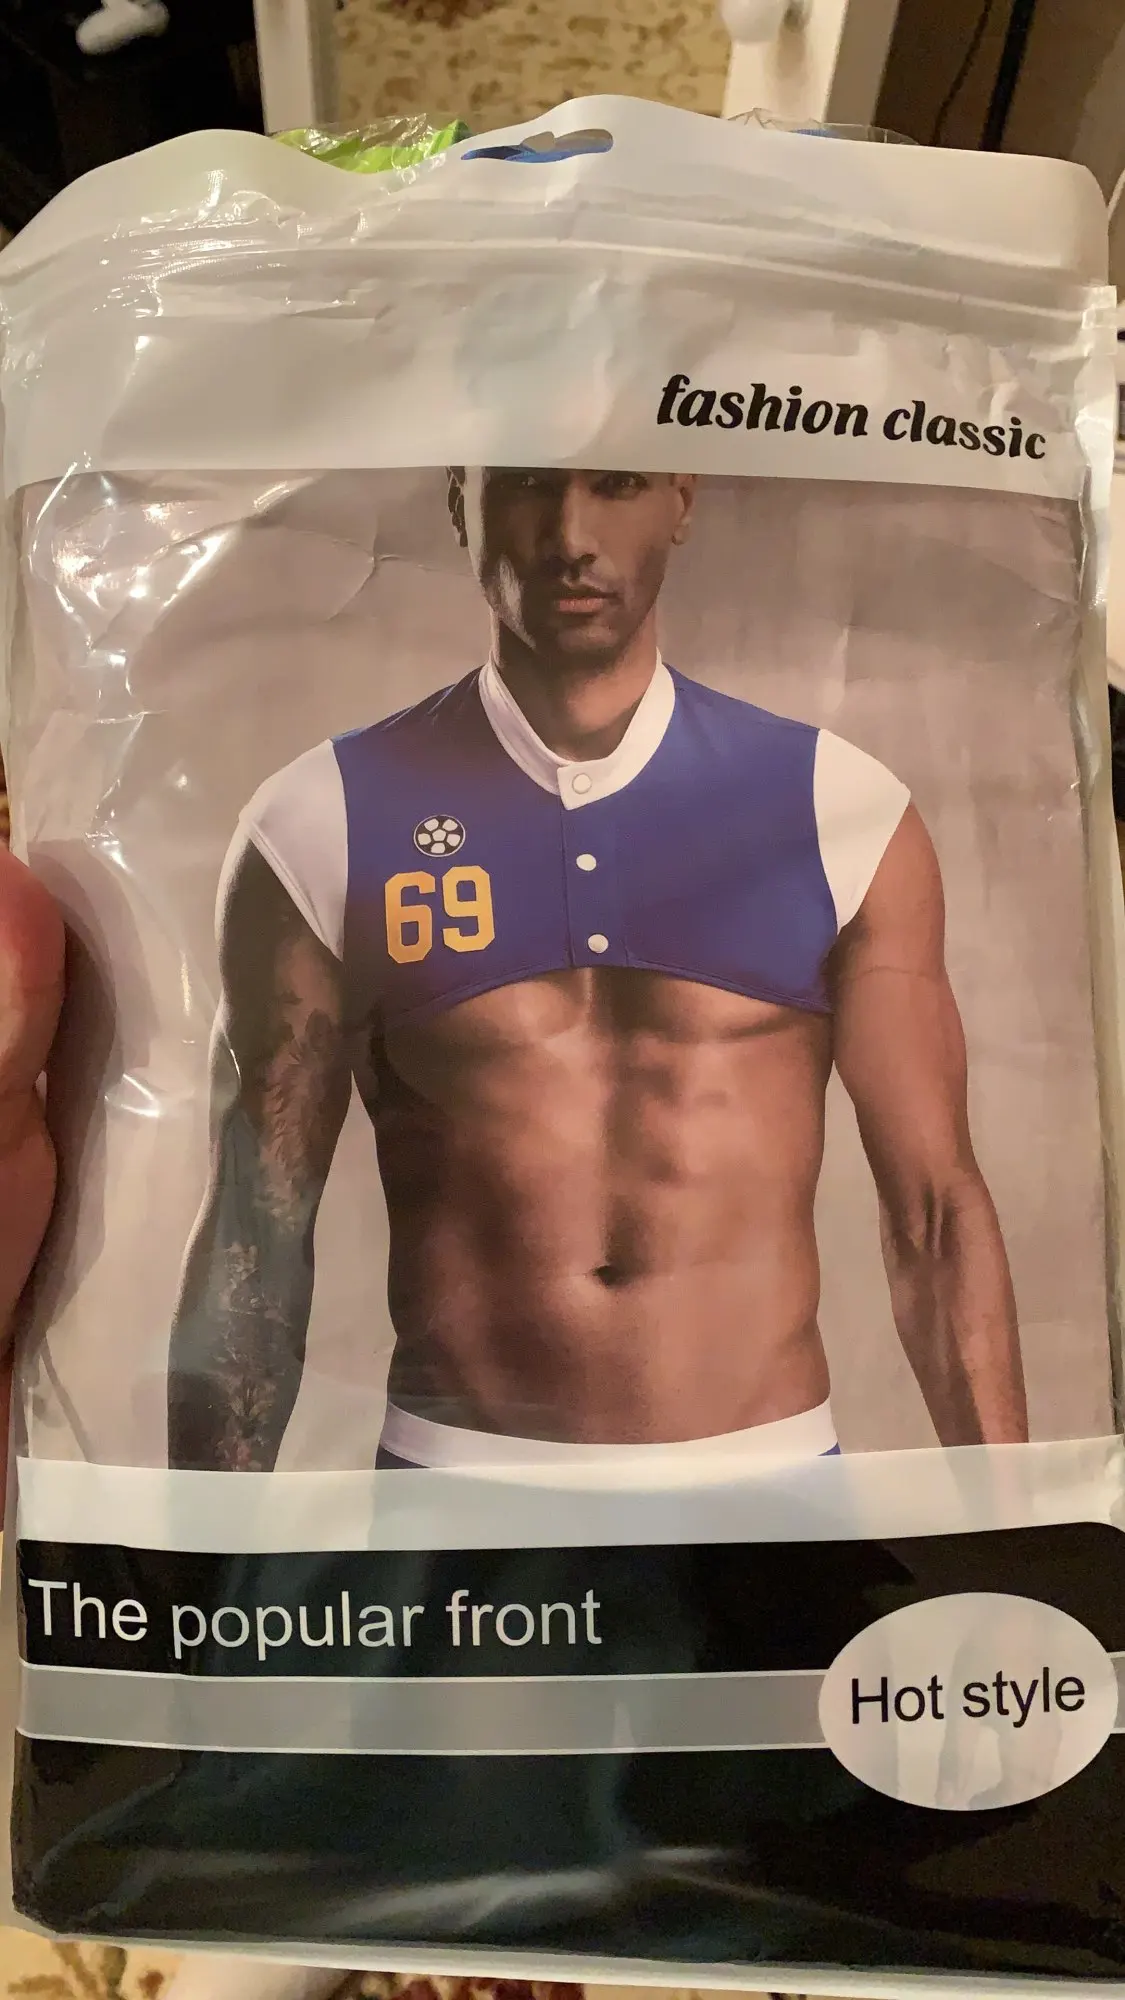 Sexy Gay Football Player Costume